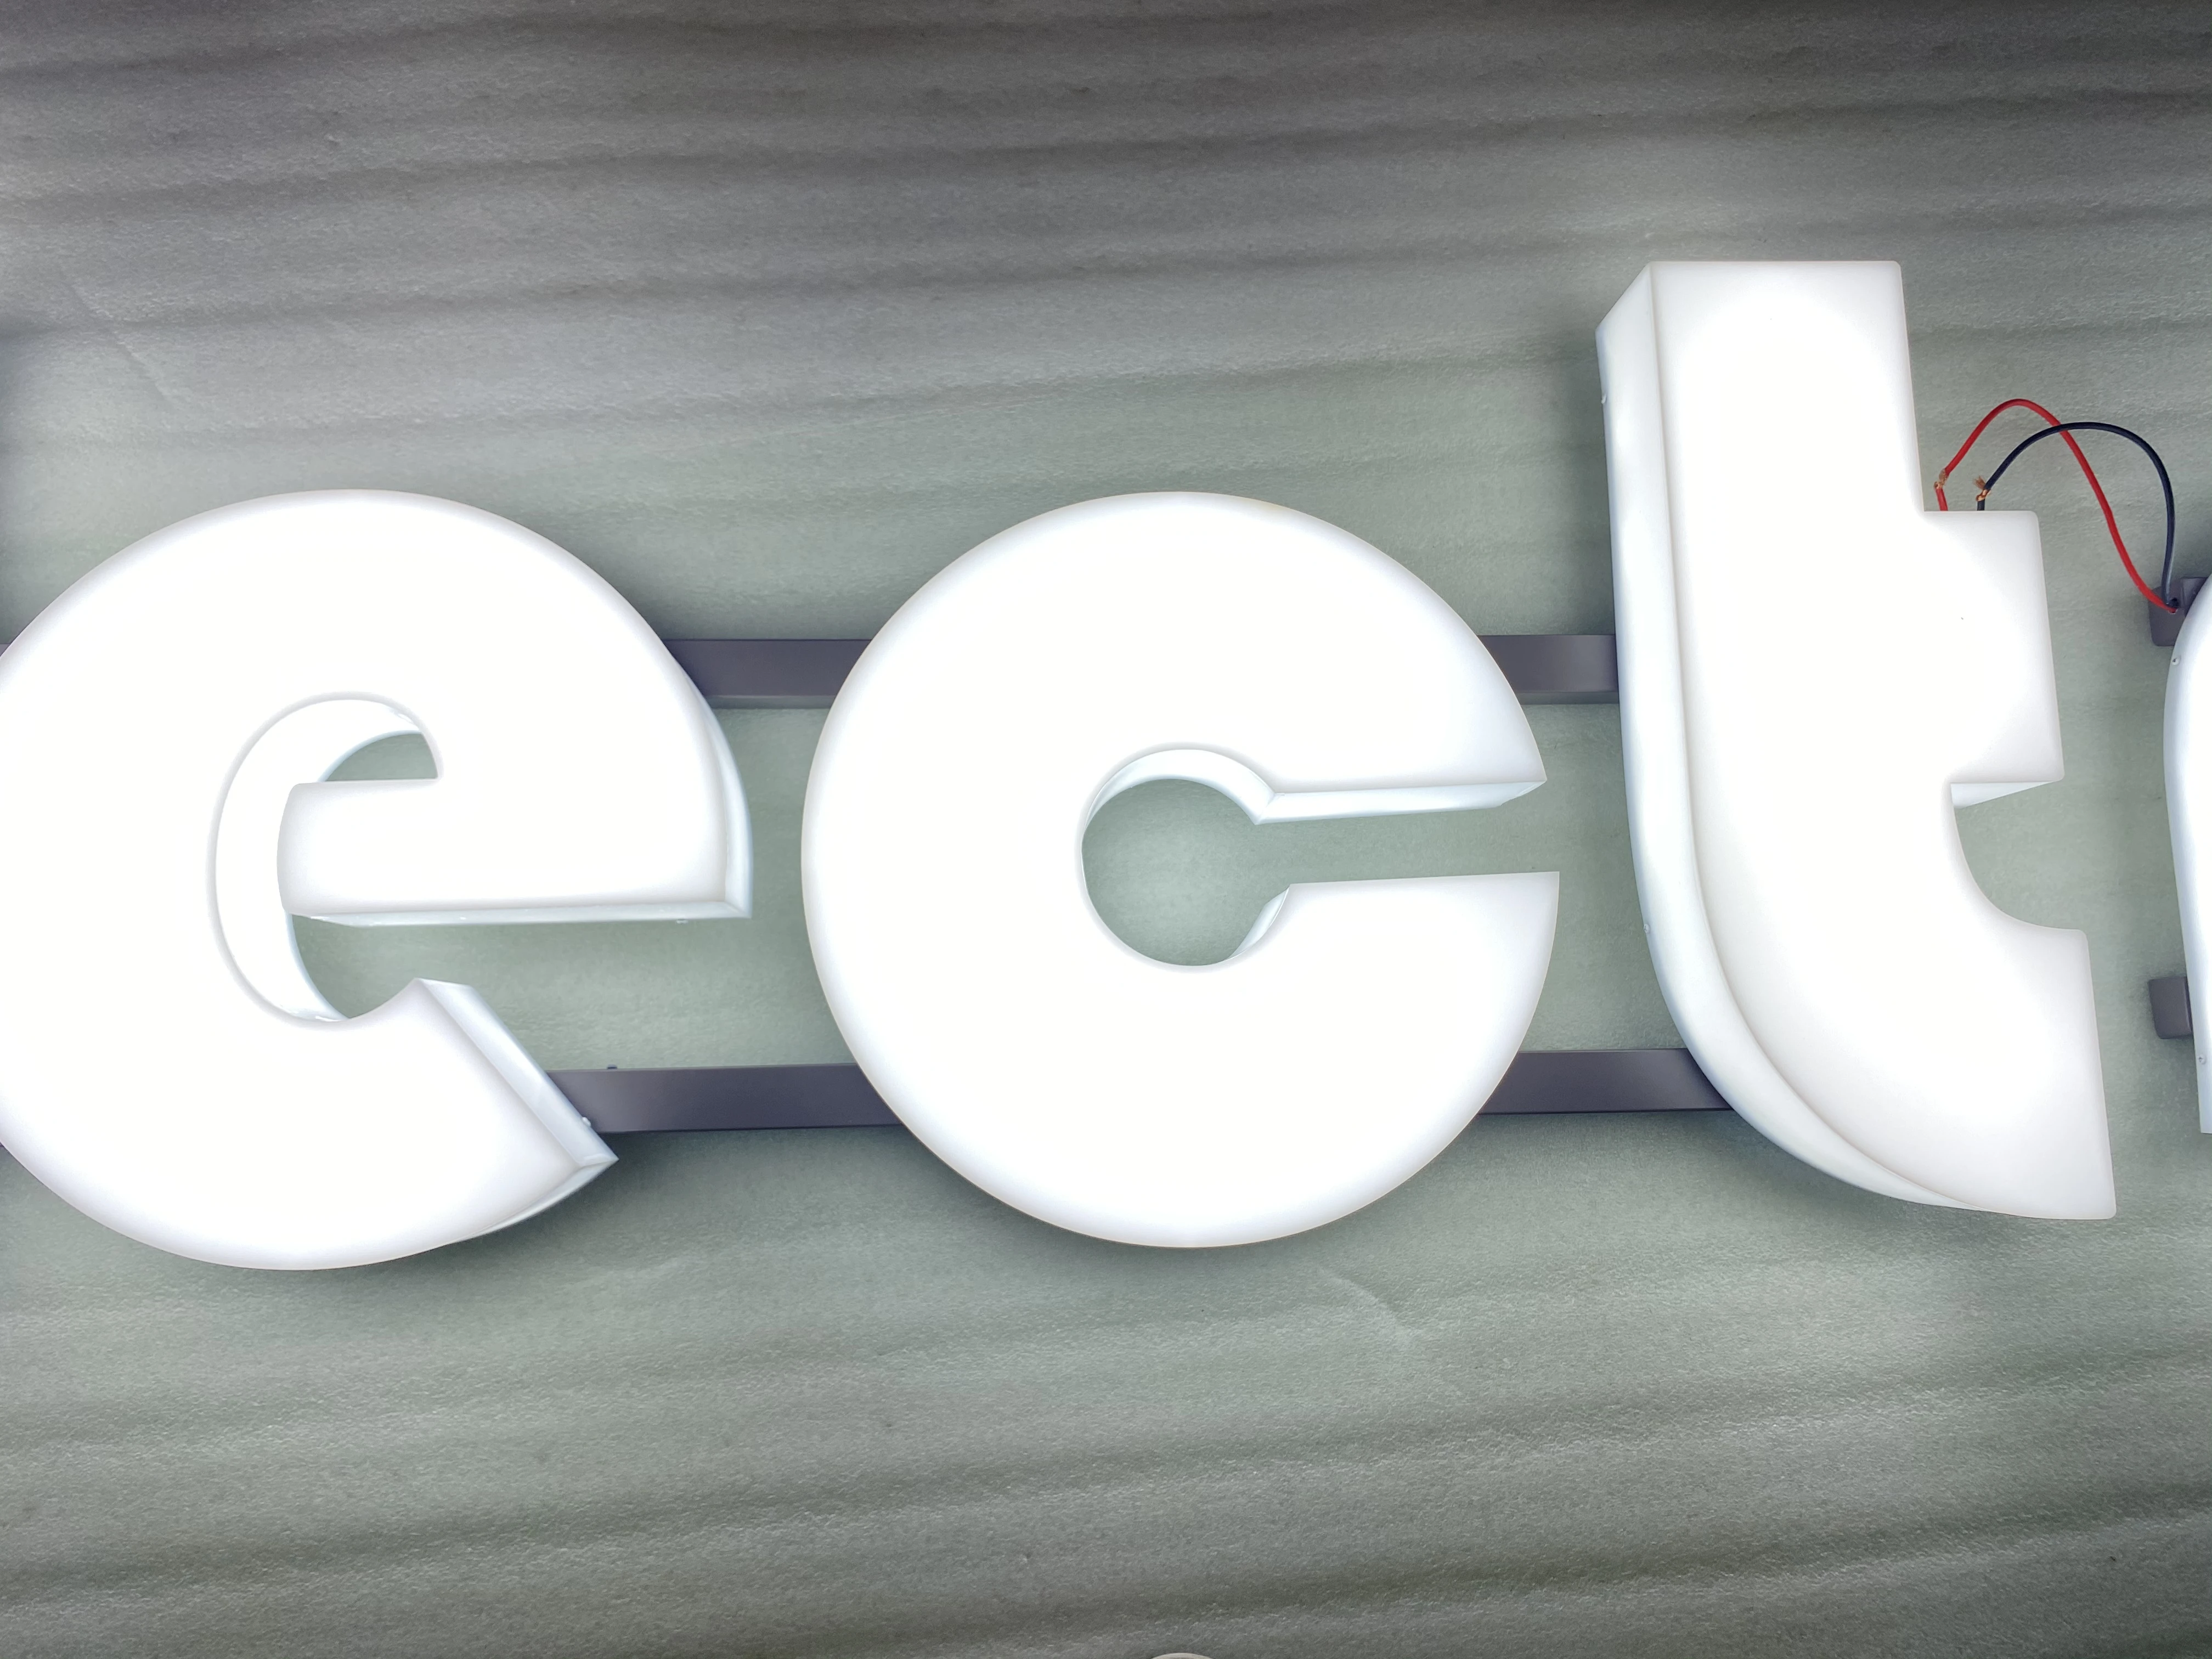 Fully illuminated dimensional Acrylic letters